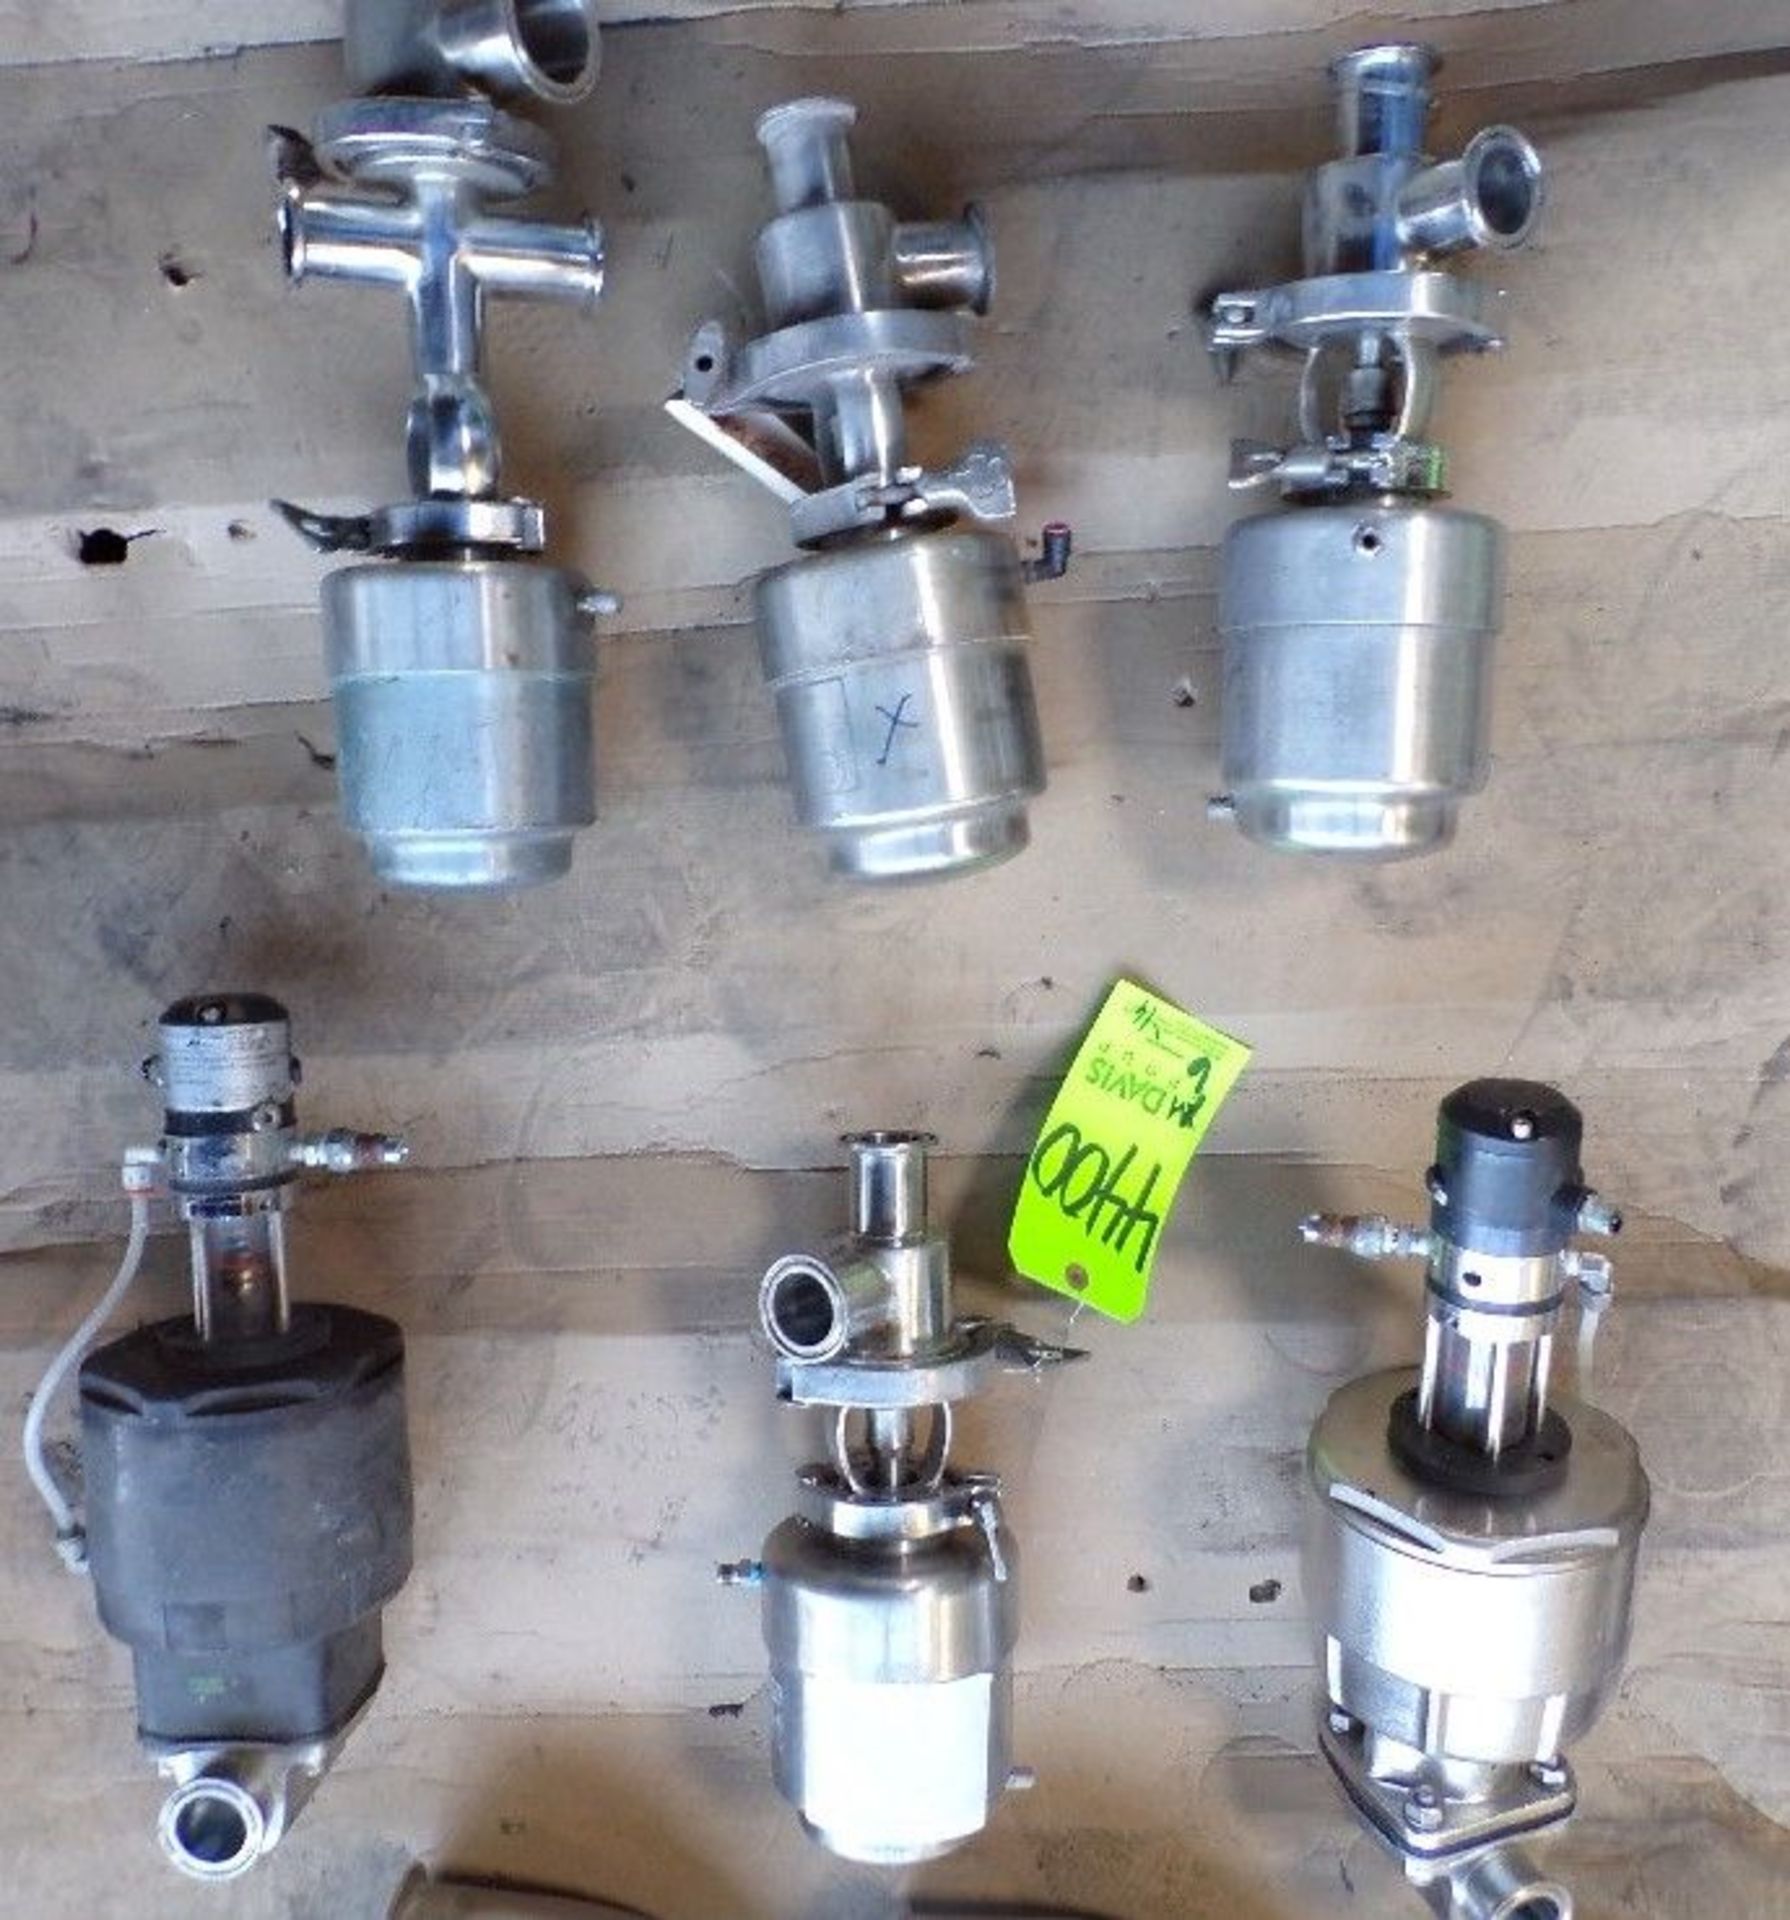 Qty (6) 1 1/2 inch sanitary plunger valves